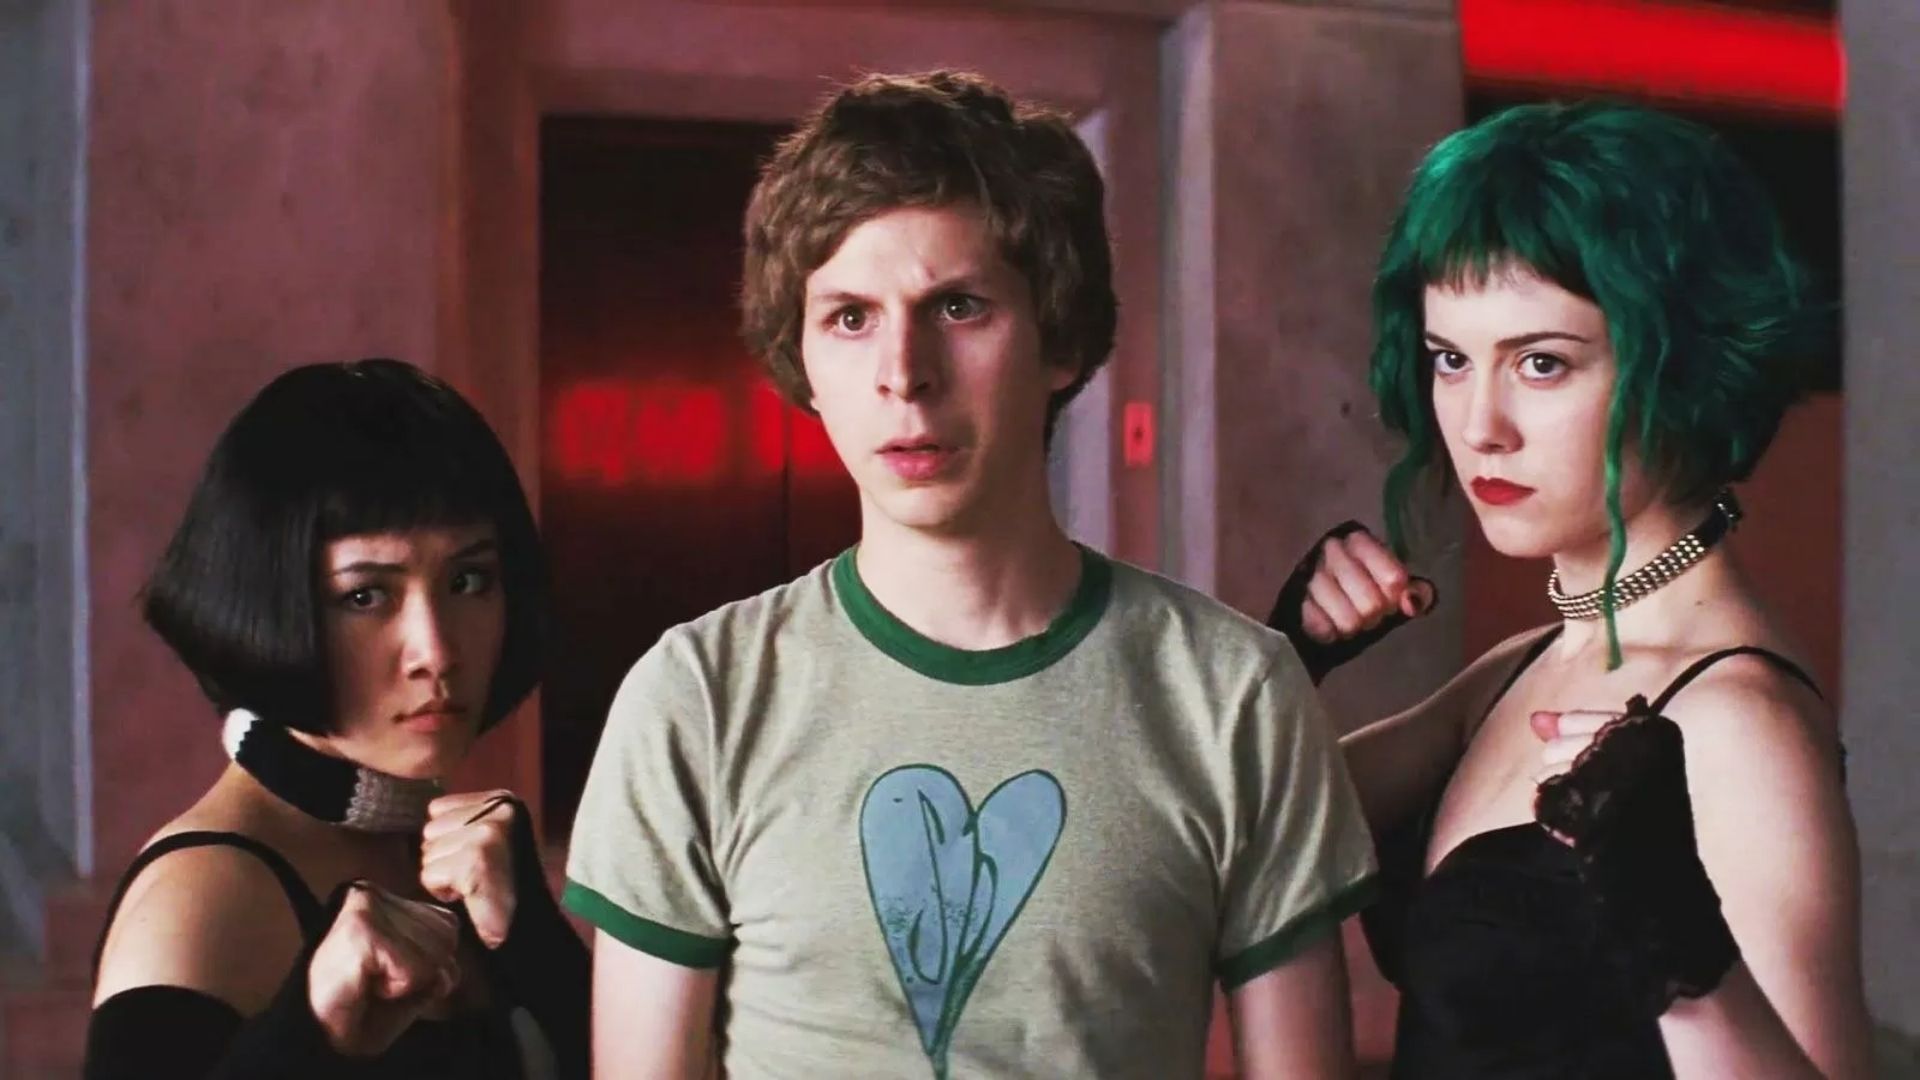 Scott Pilgrim, the latest in a new Netflix series that will have fans going crazy